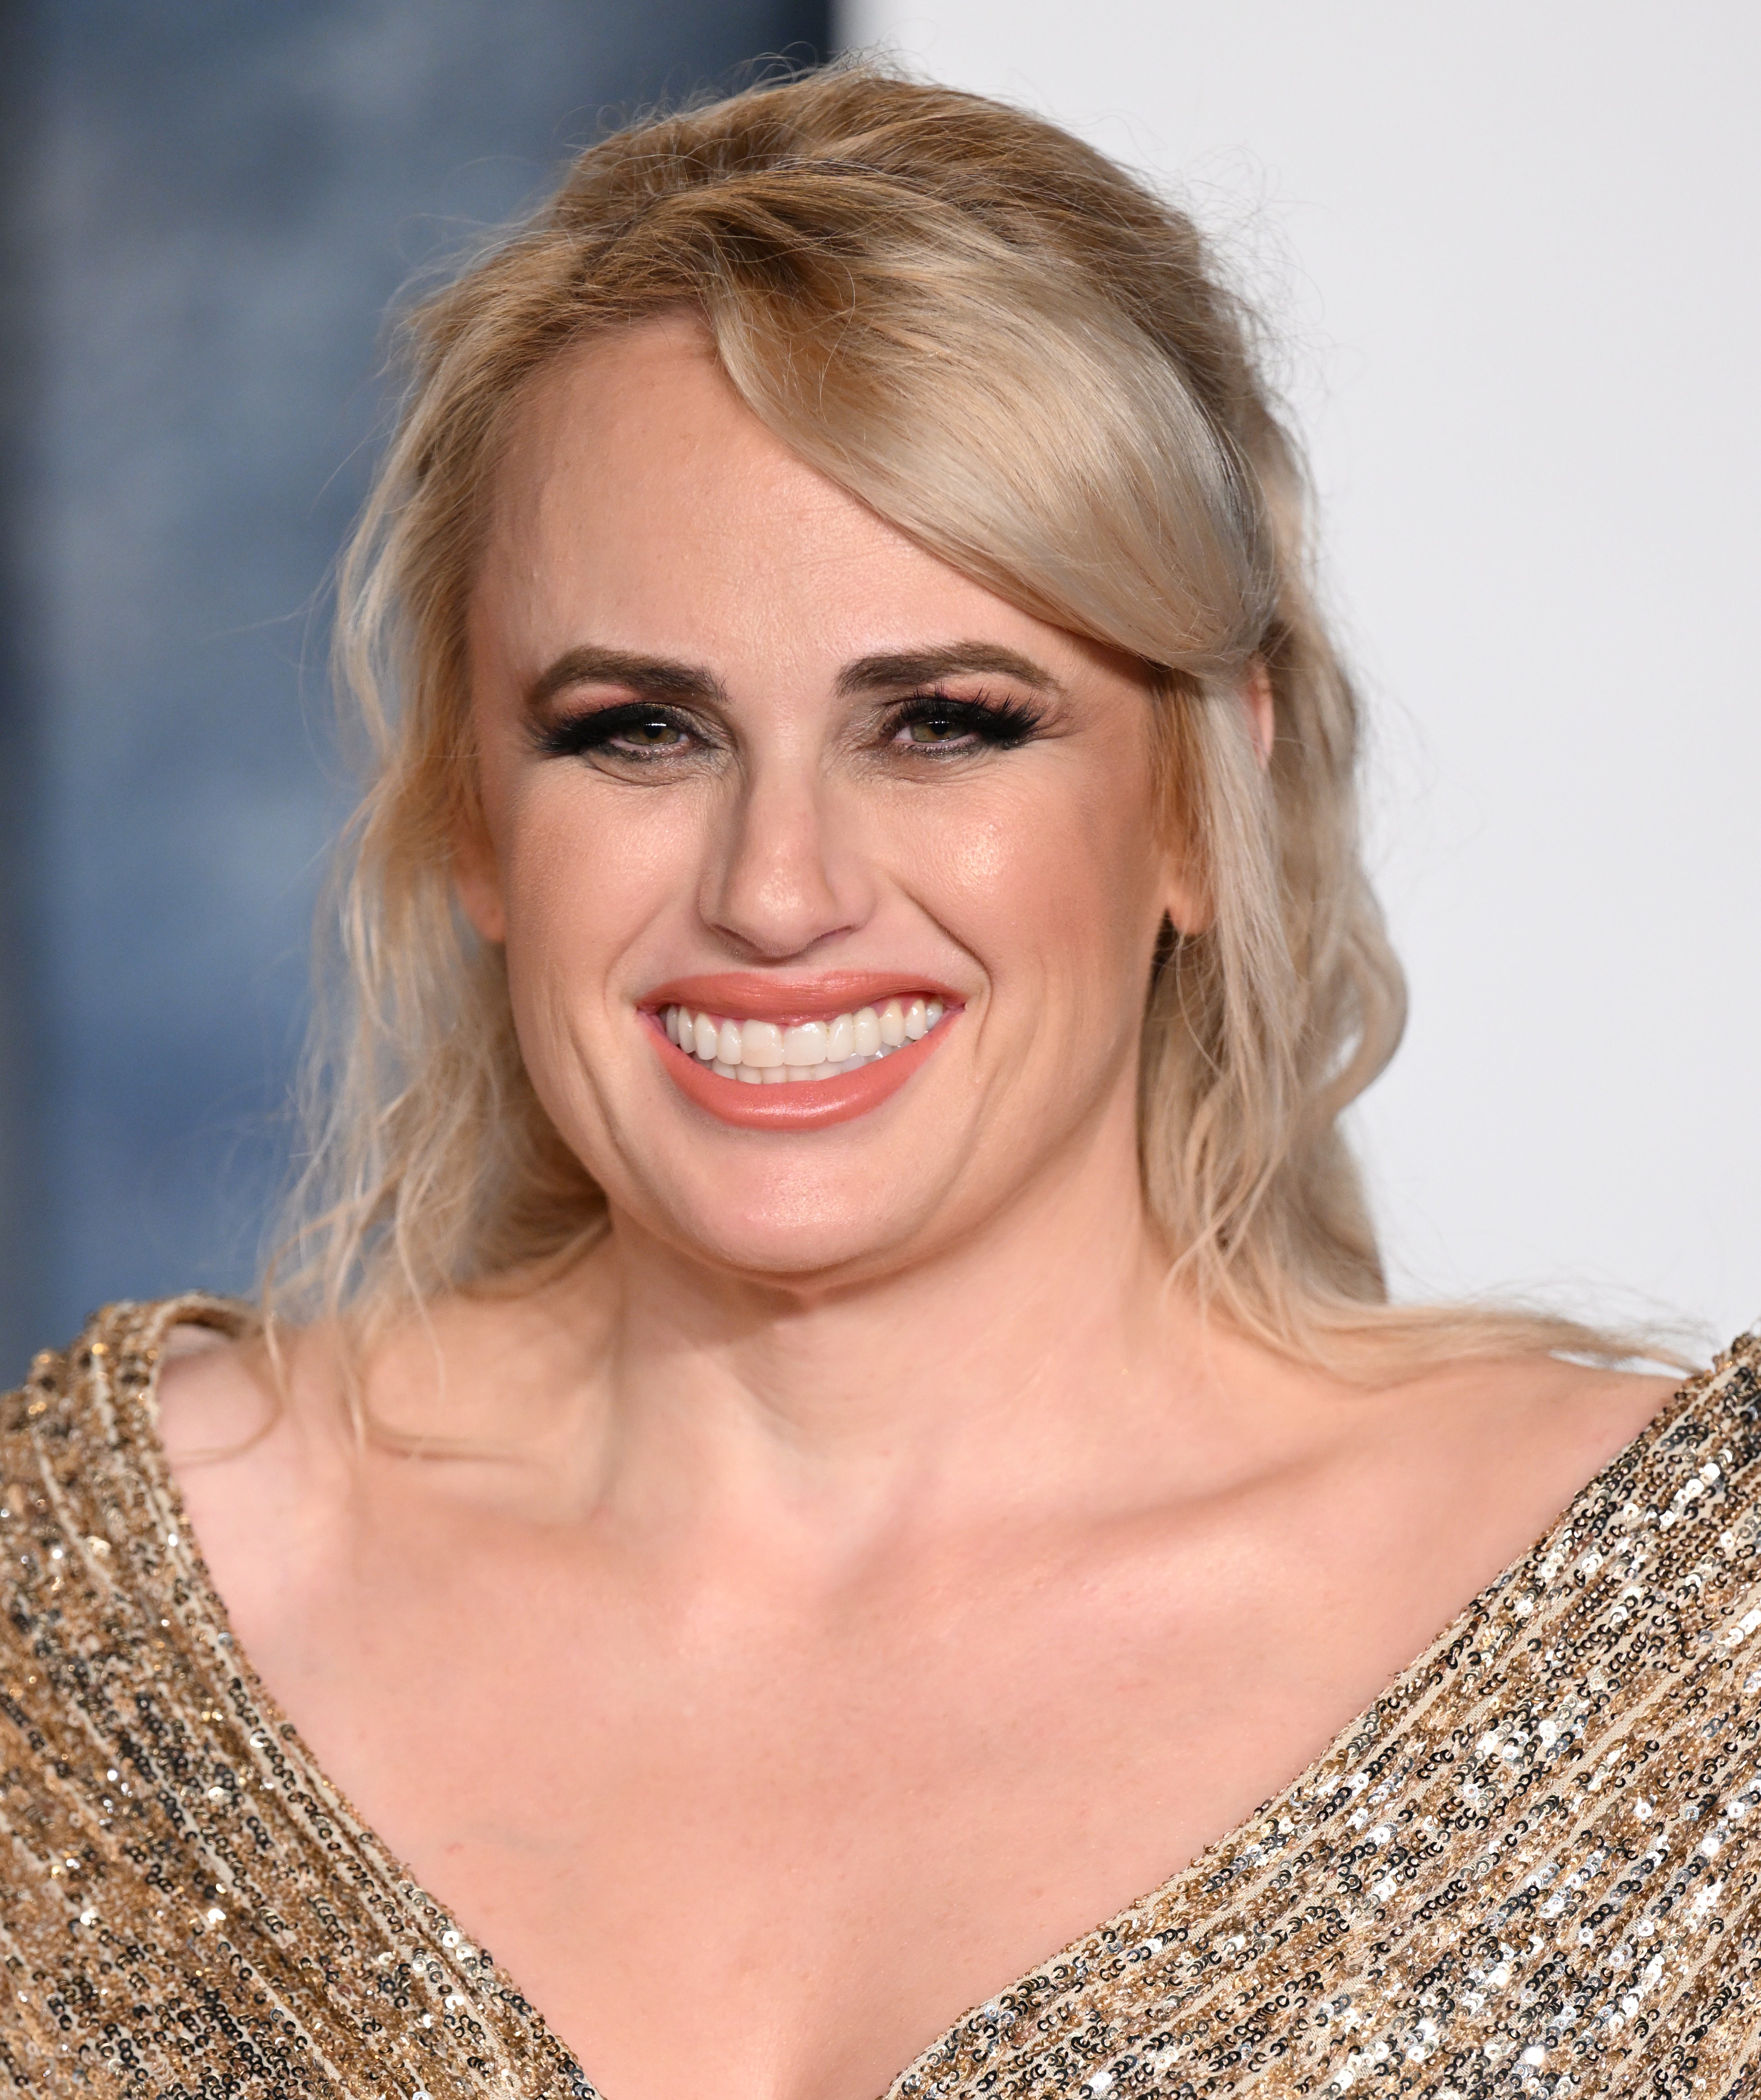 Rebel Wilson in a glittery dress with a V-neckline